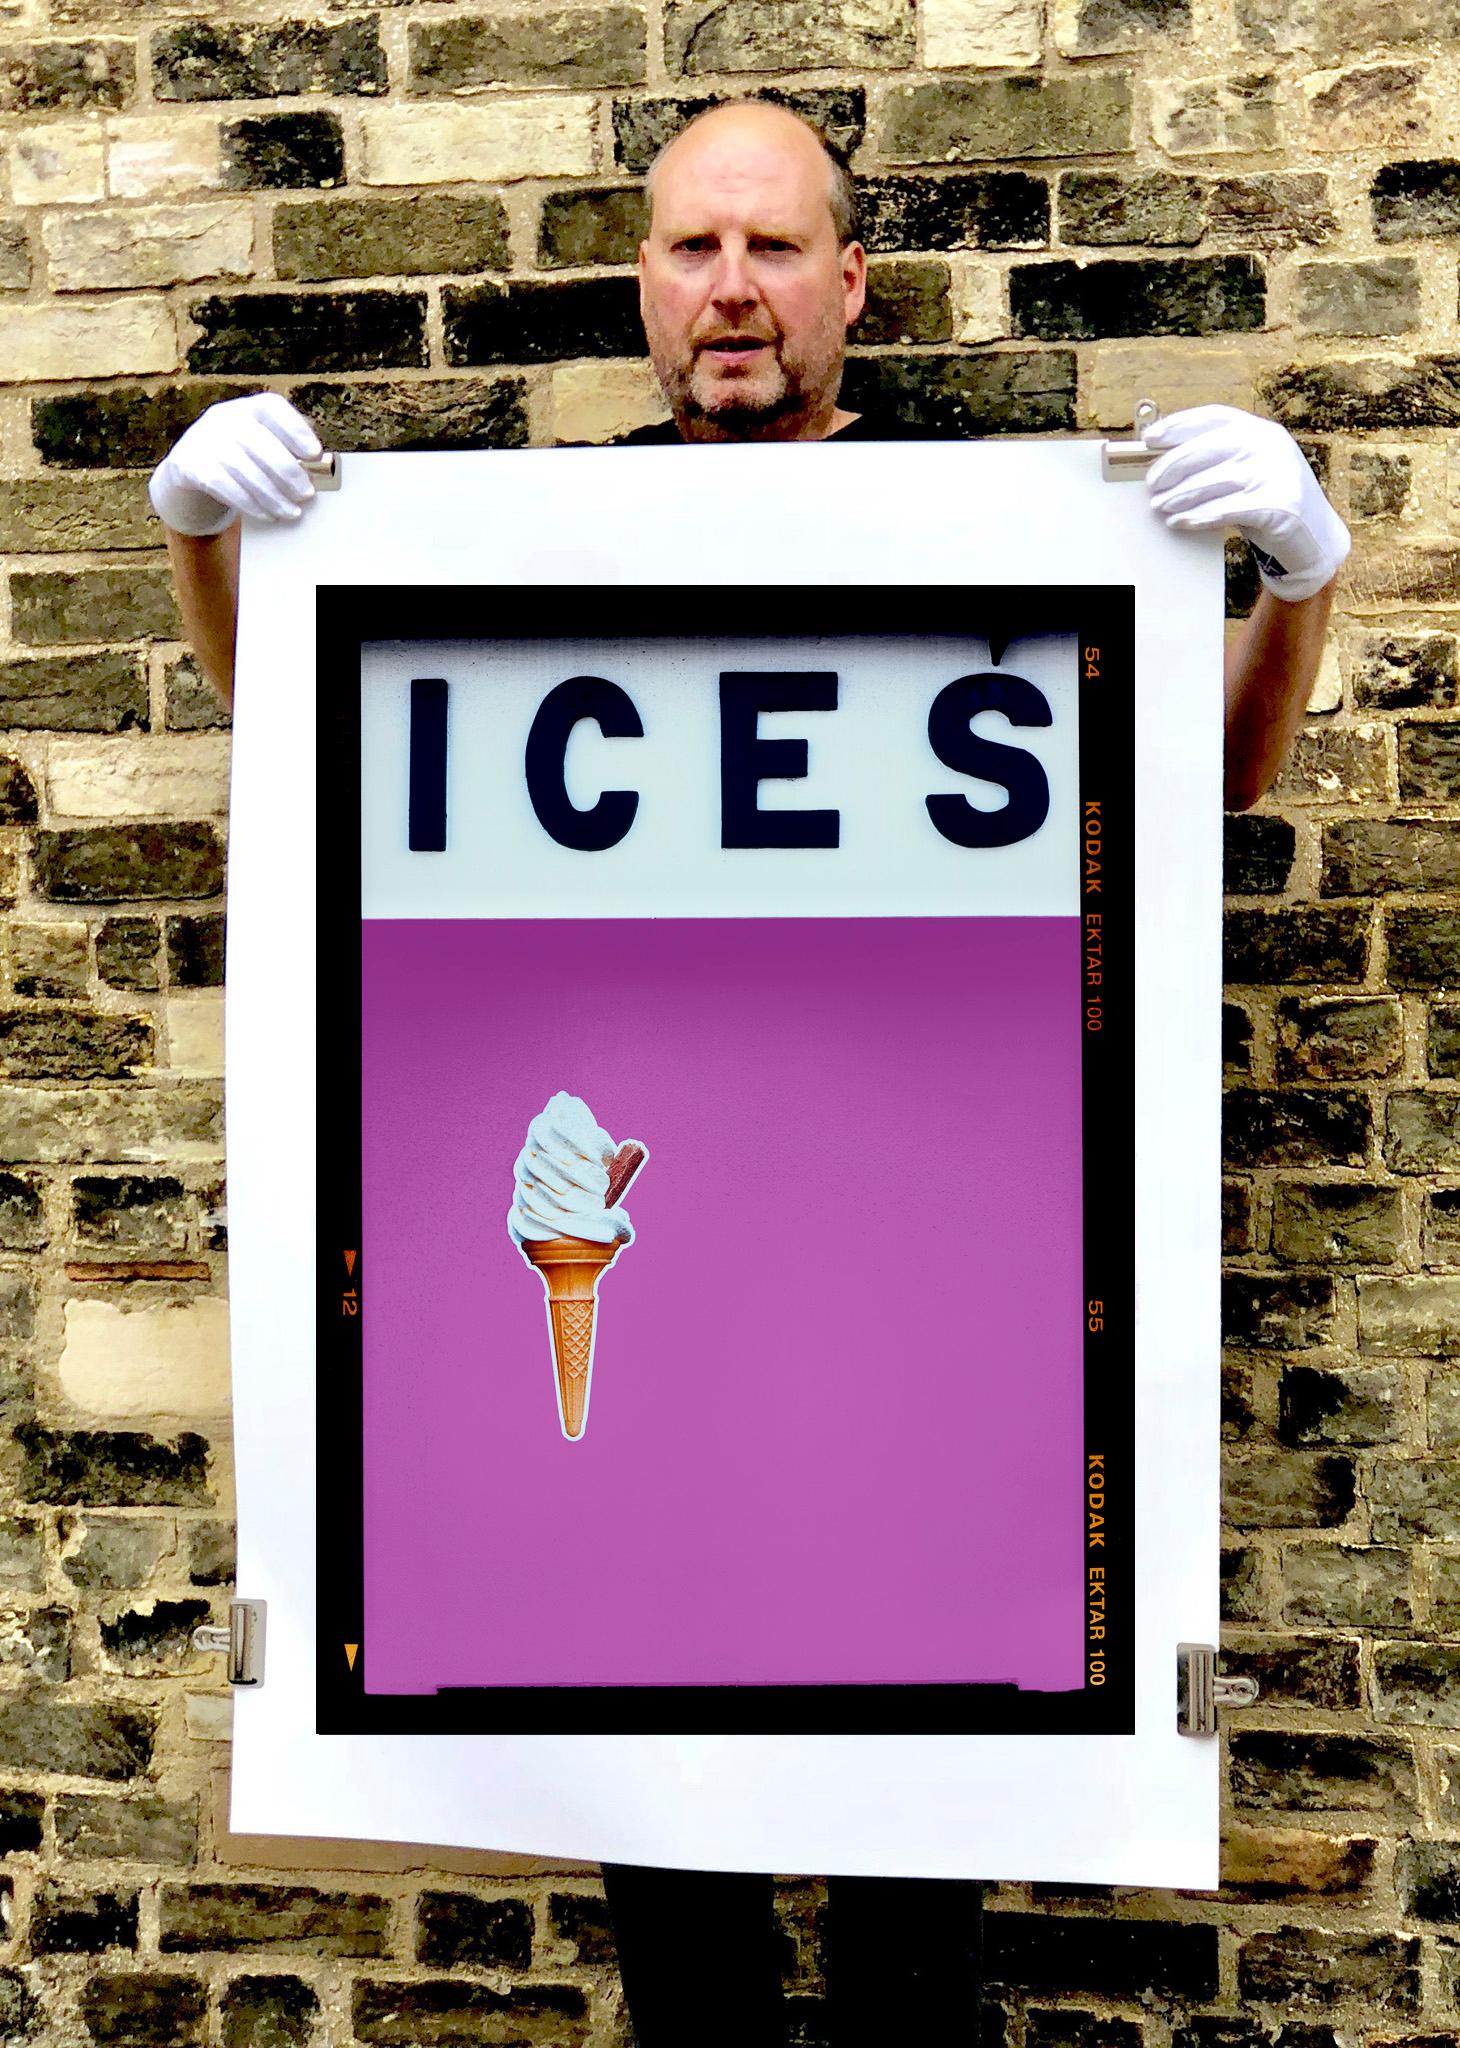 ICES (Plum), Bexhill-on-Sea - British seaside color photography - Photograph by Richard Heeps